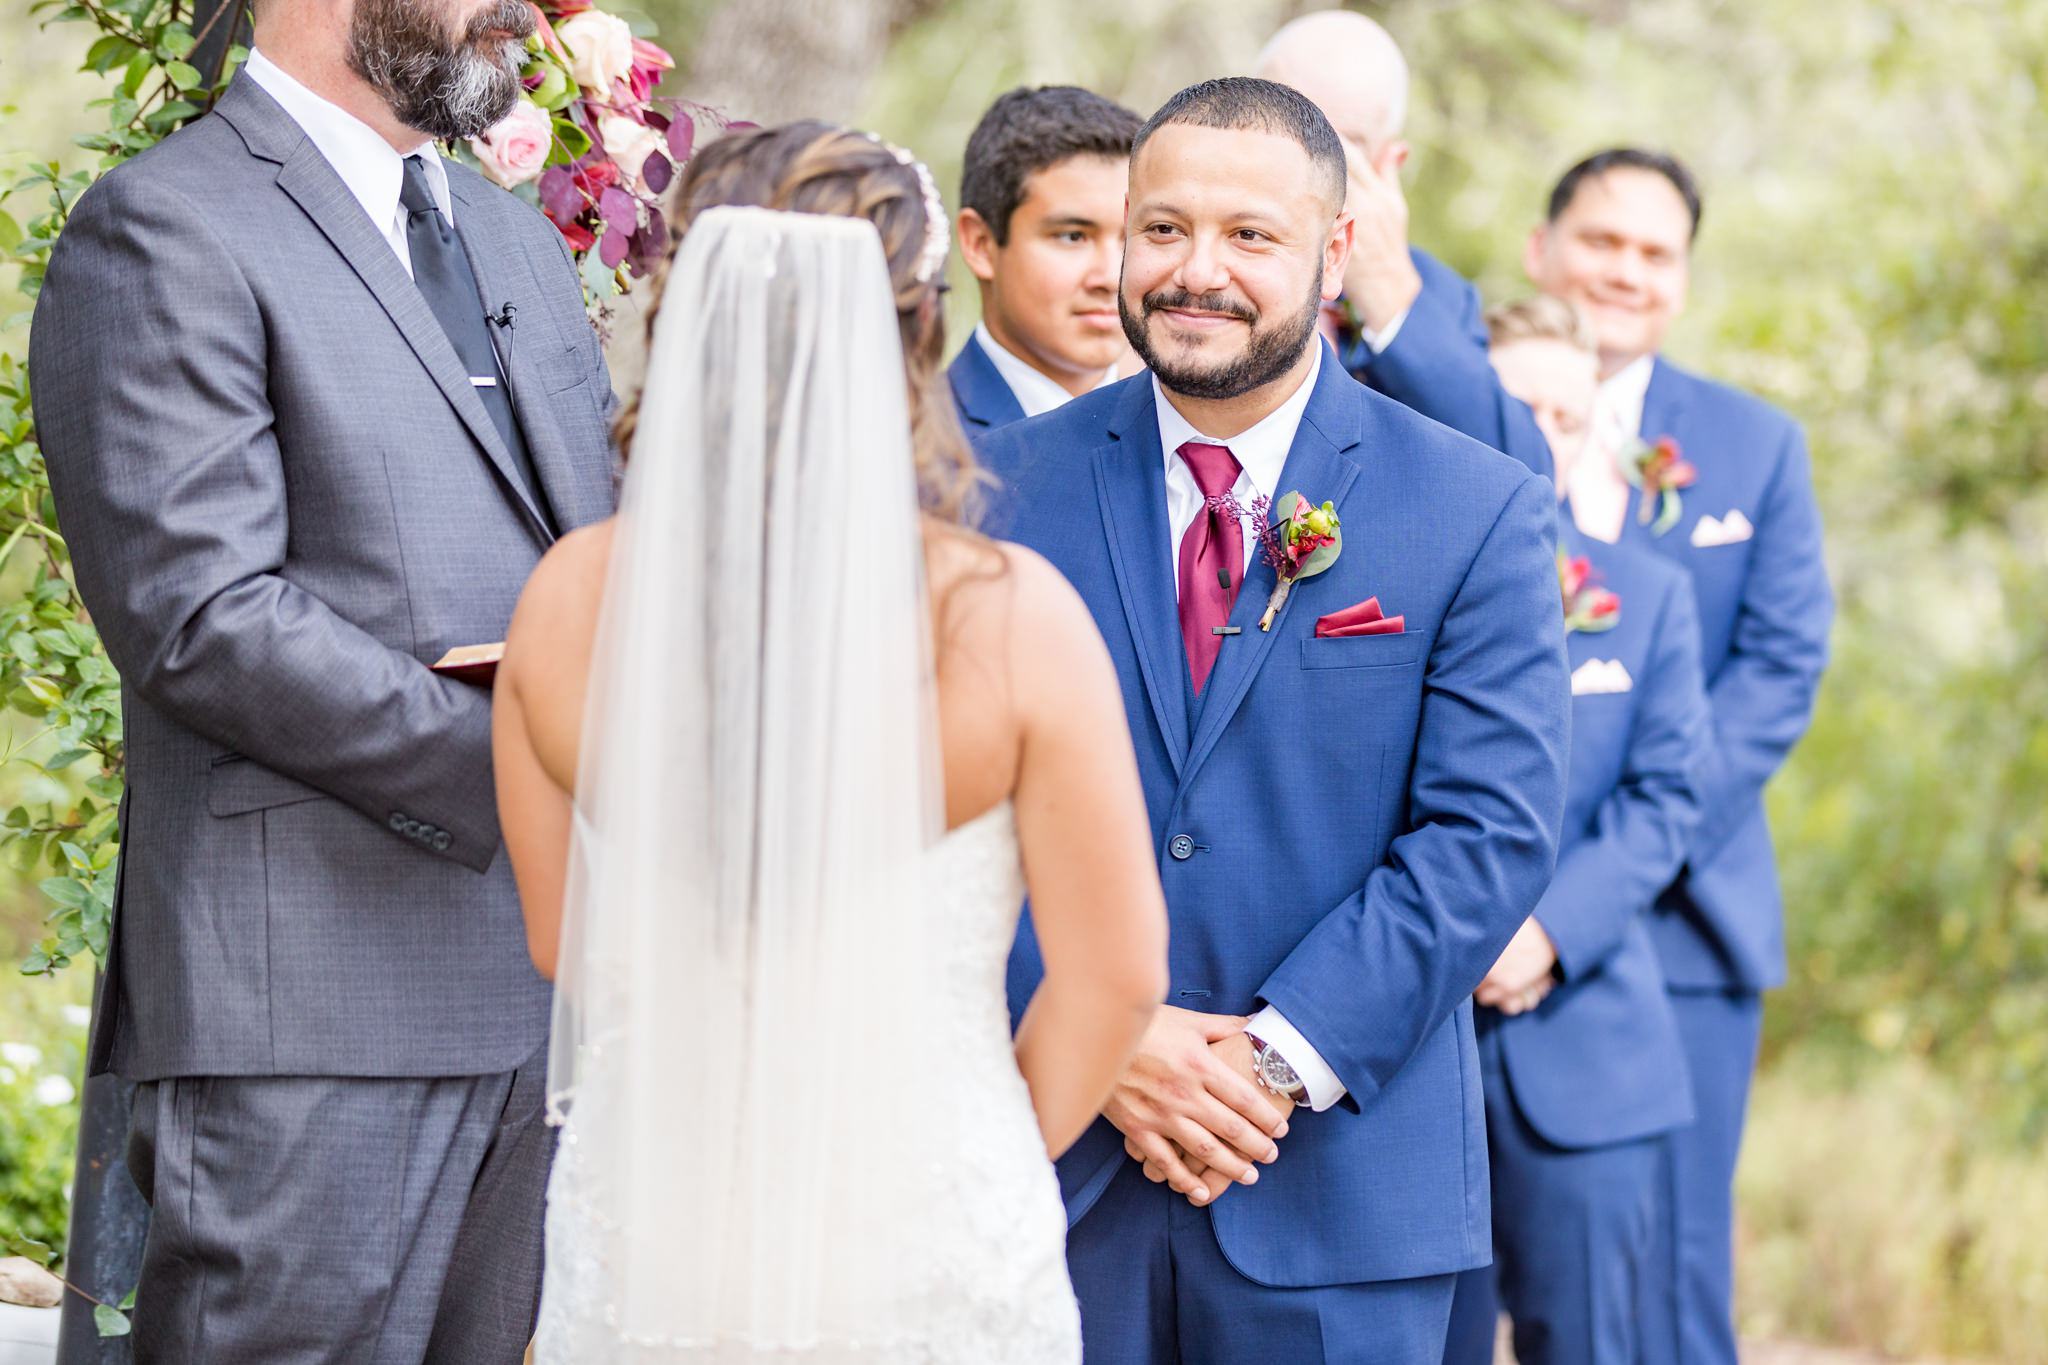 A Burgundy and Navy Wedding at the Oaks at Heavenly in Helotes, TX by Dawn Elizabeth Studios, San Antonio Wedding Photographer